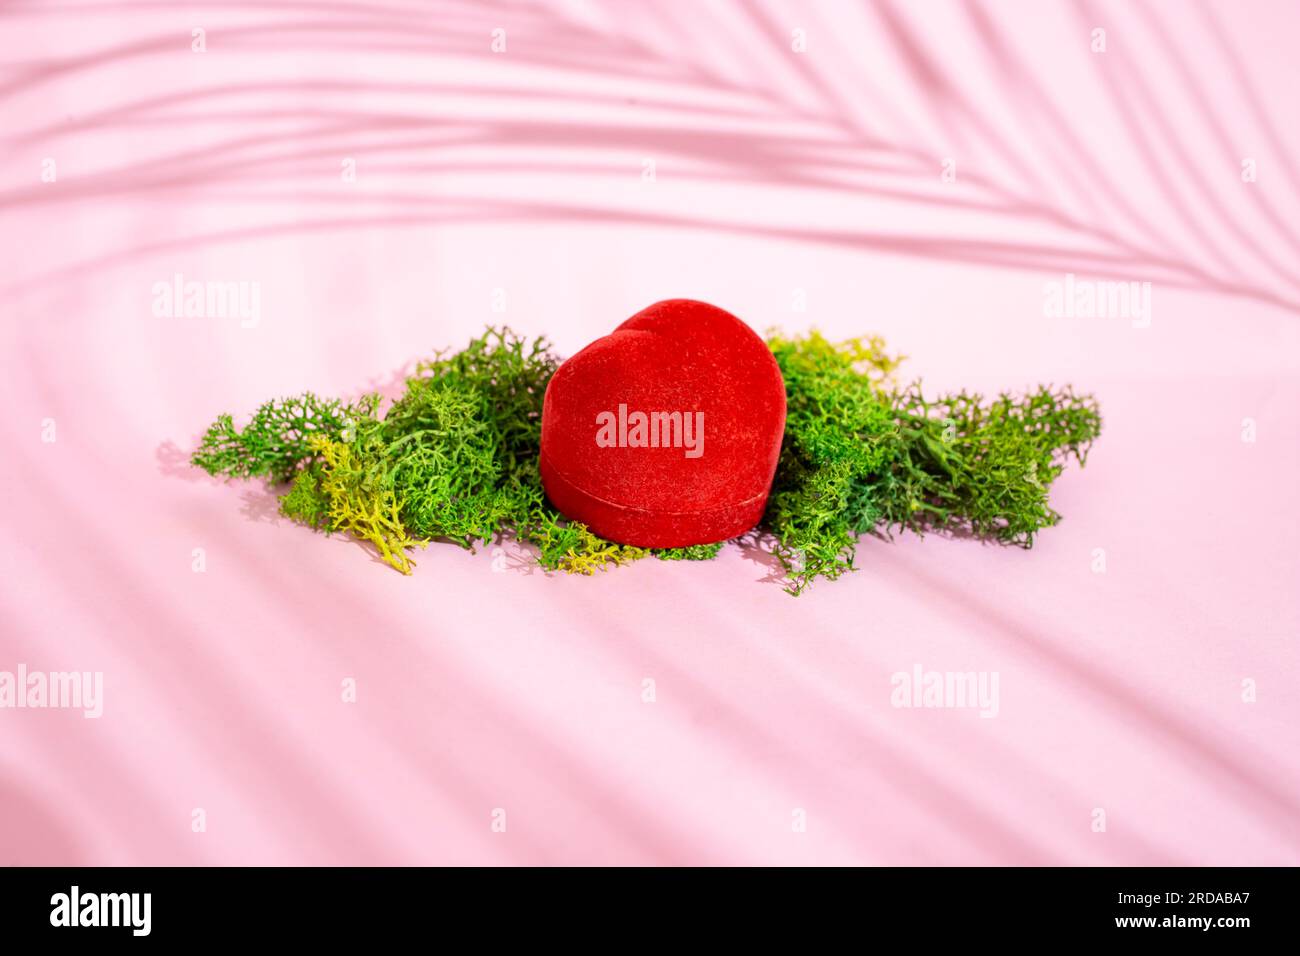 Red velvet jewelry box with green lichen moss on pink background with palm leaf shadows Stock Photo